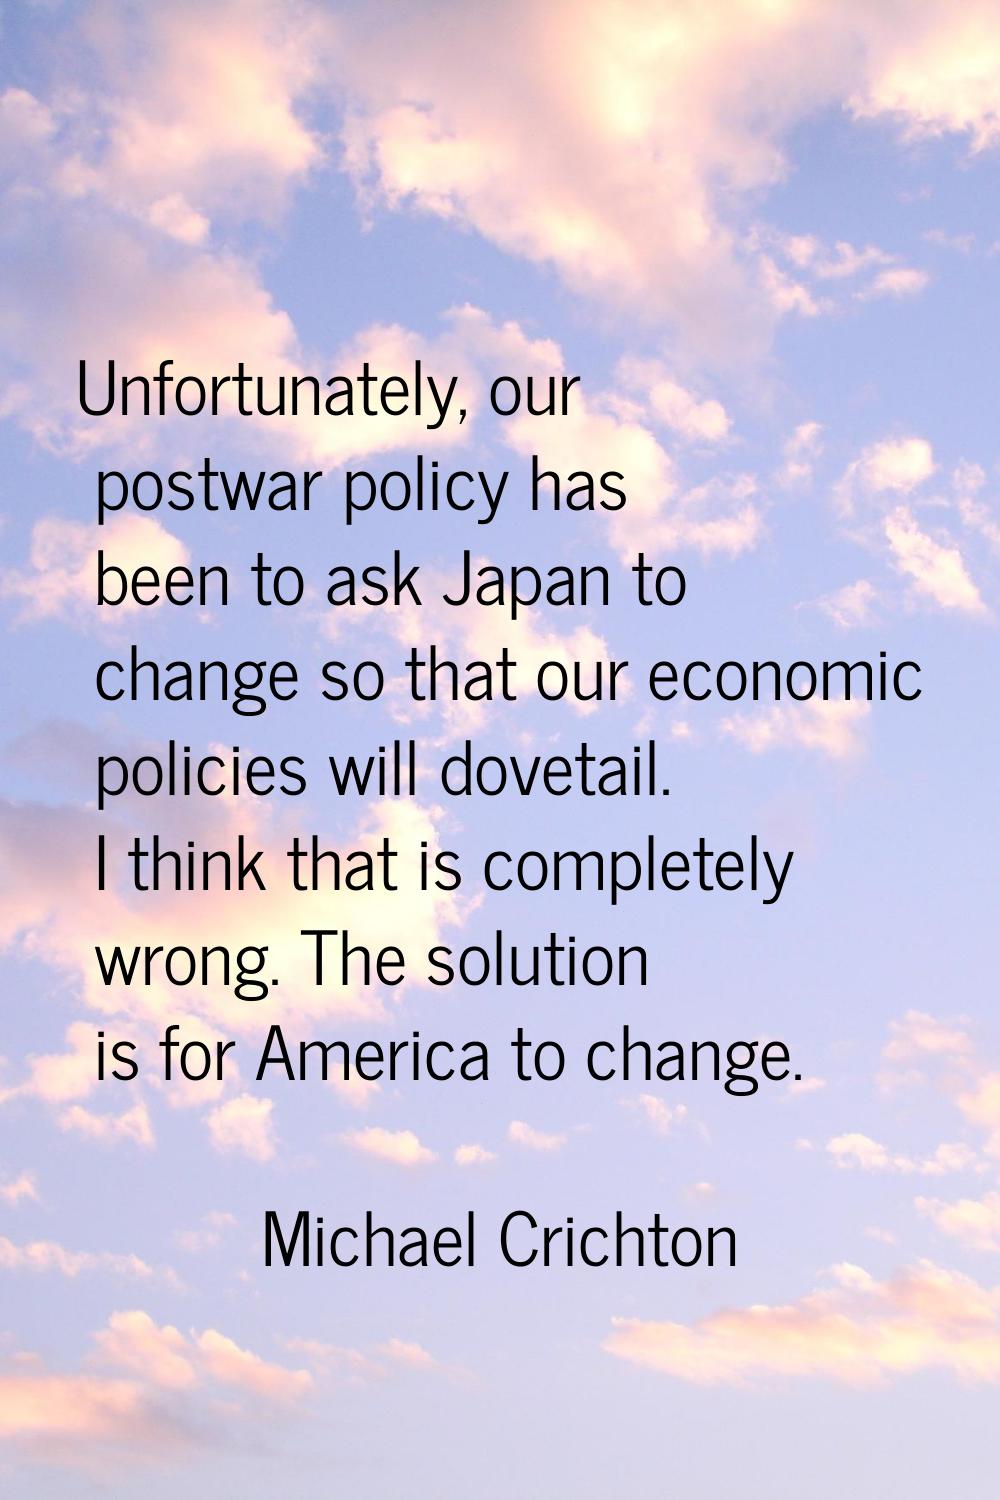 Unfortunately, our postwar policy has been to ask Japan to change so that our economic policies wil